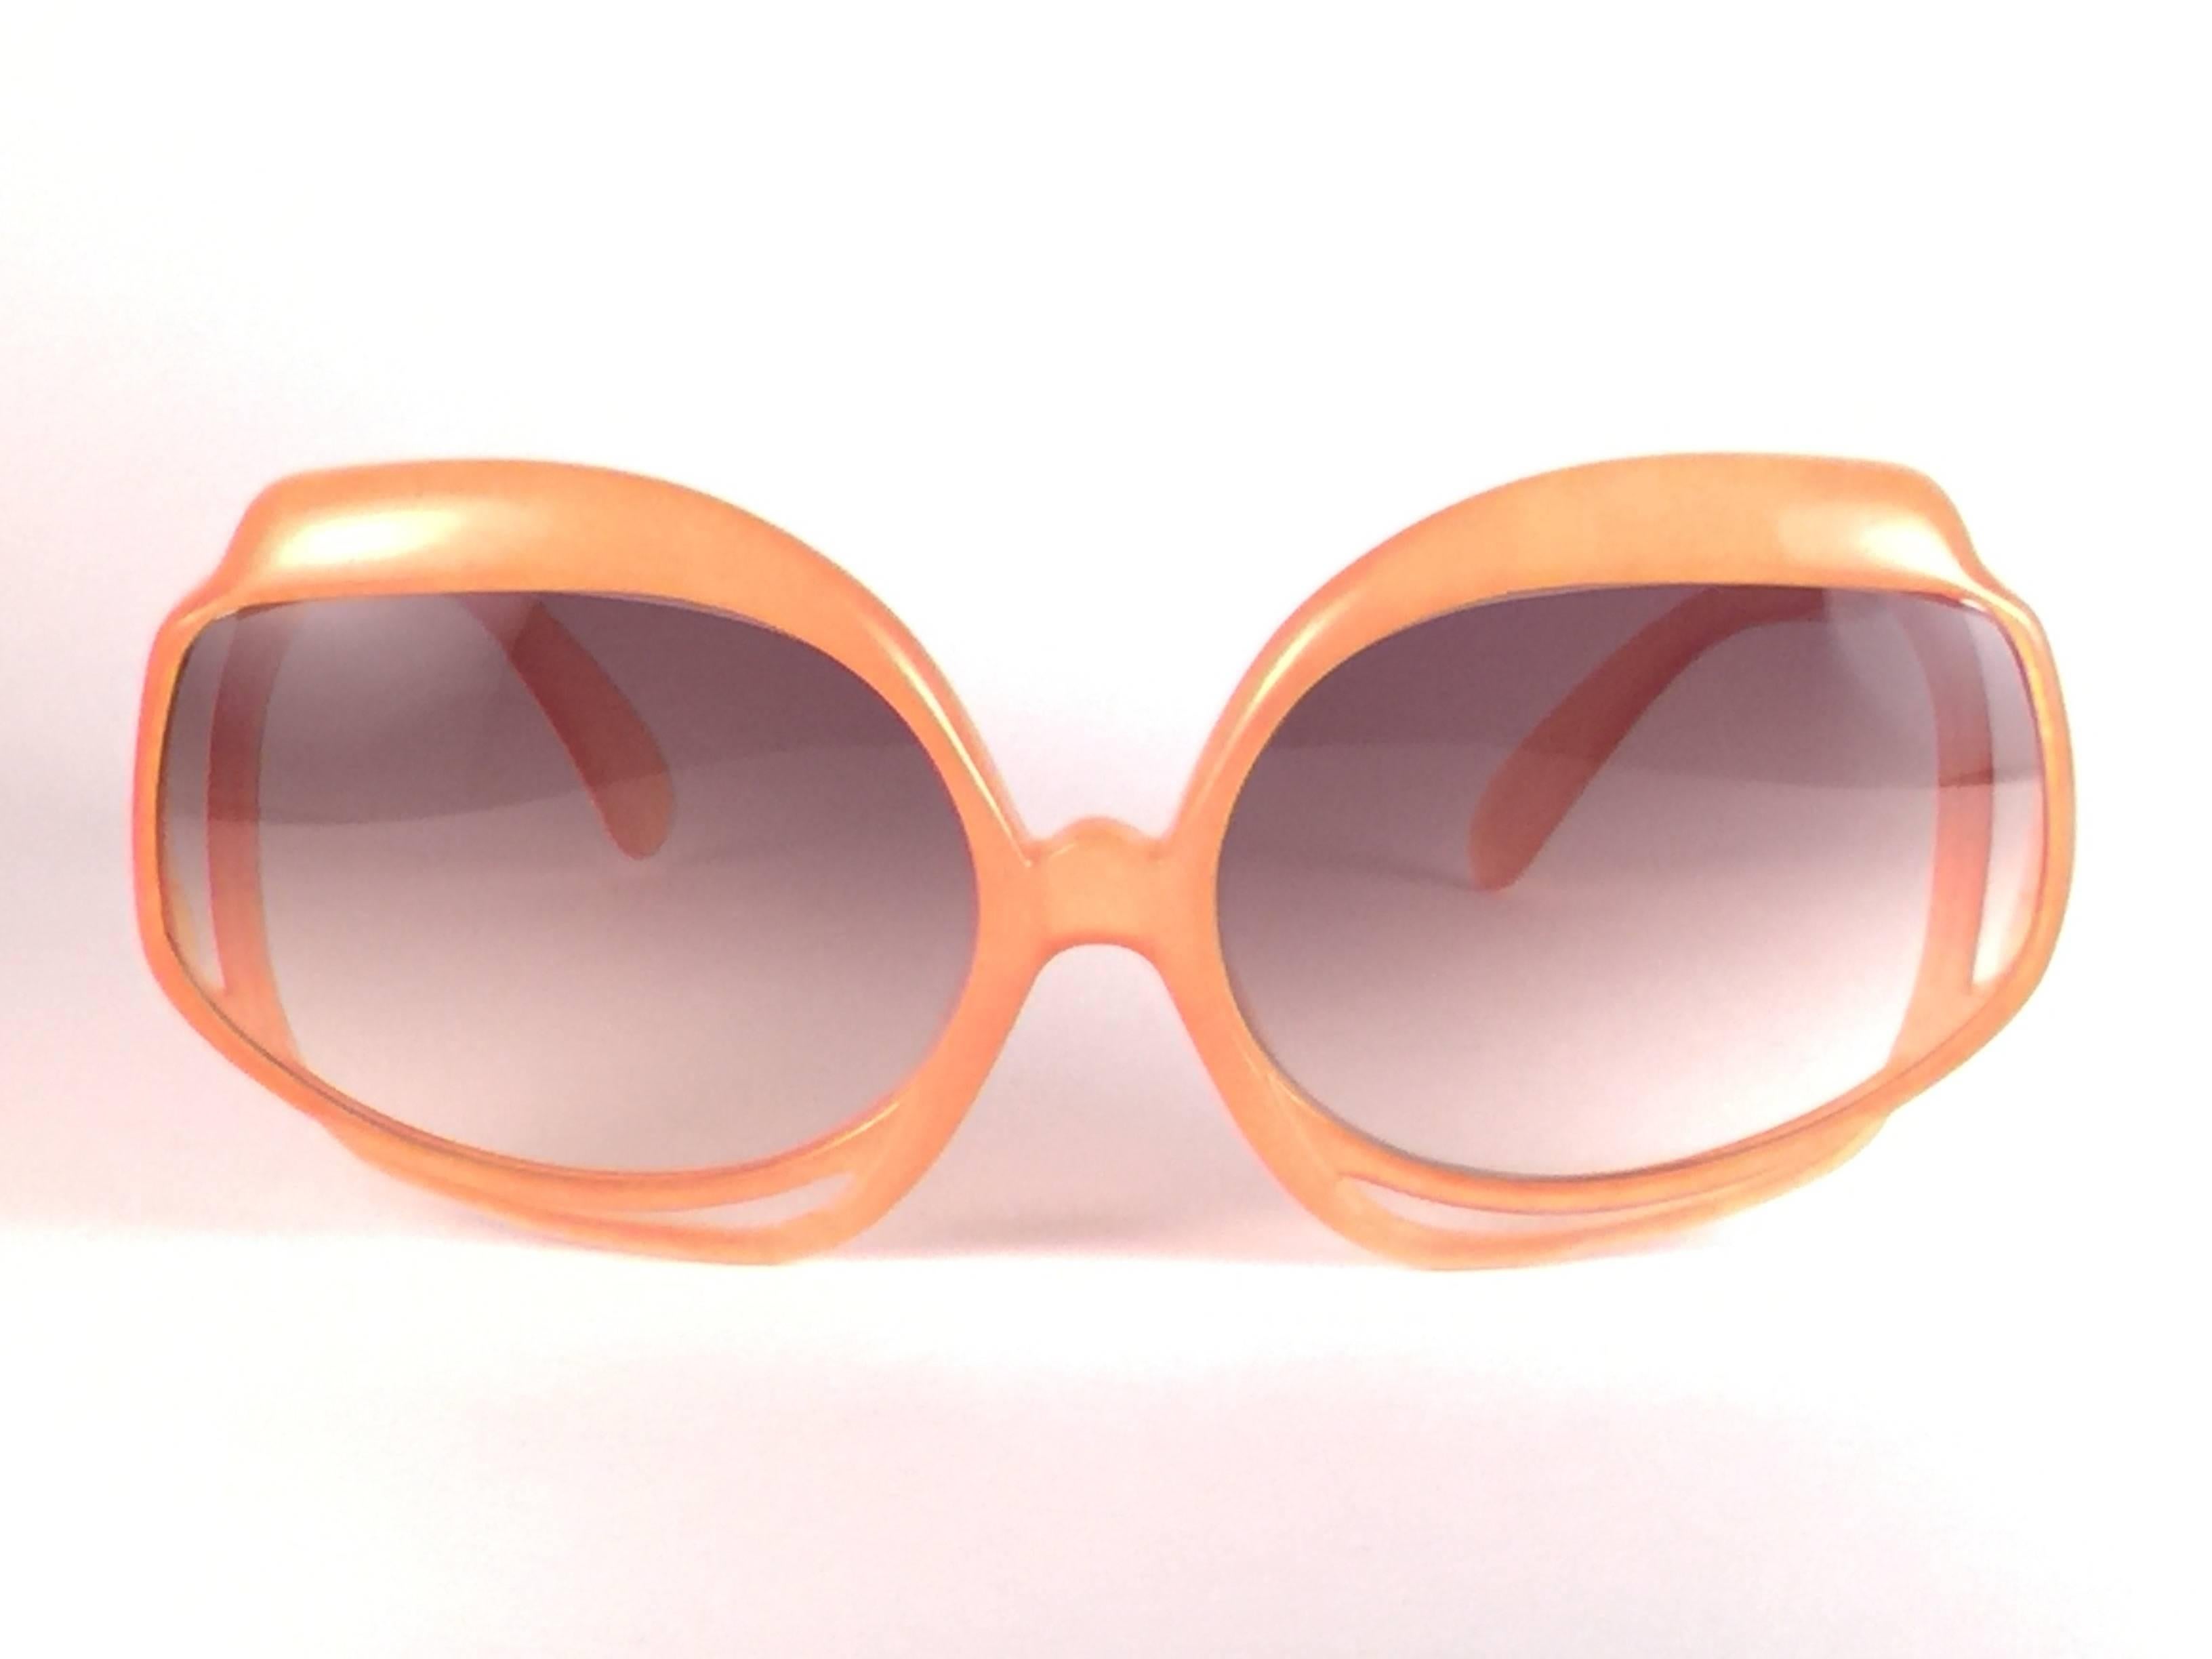 New Vintage Christian Dior 2026 30 tangerine frame with spotless light brown gradient lenses.   
Made in Germany.  
Produced and design in 1970's.  
A collector’s piece!  
New, never worn or displayed.
Comes with its original silver Christian Dior